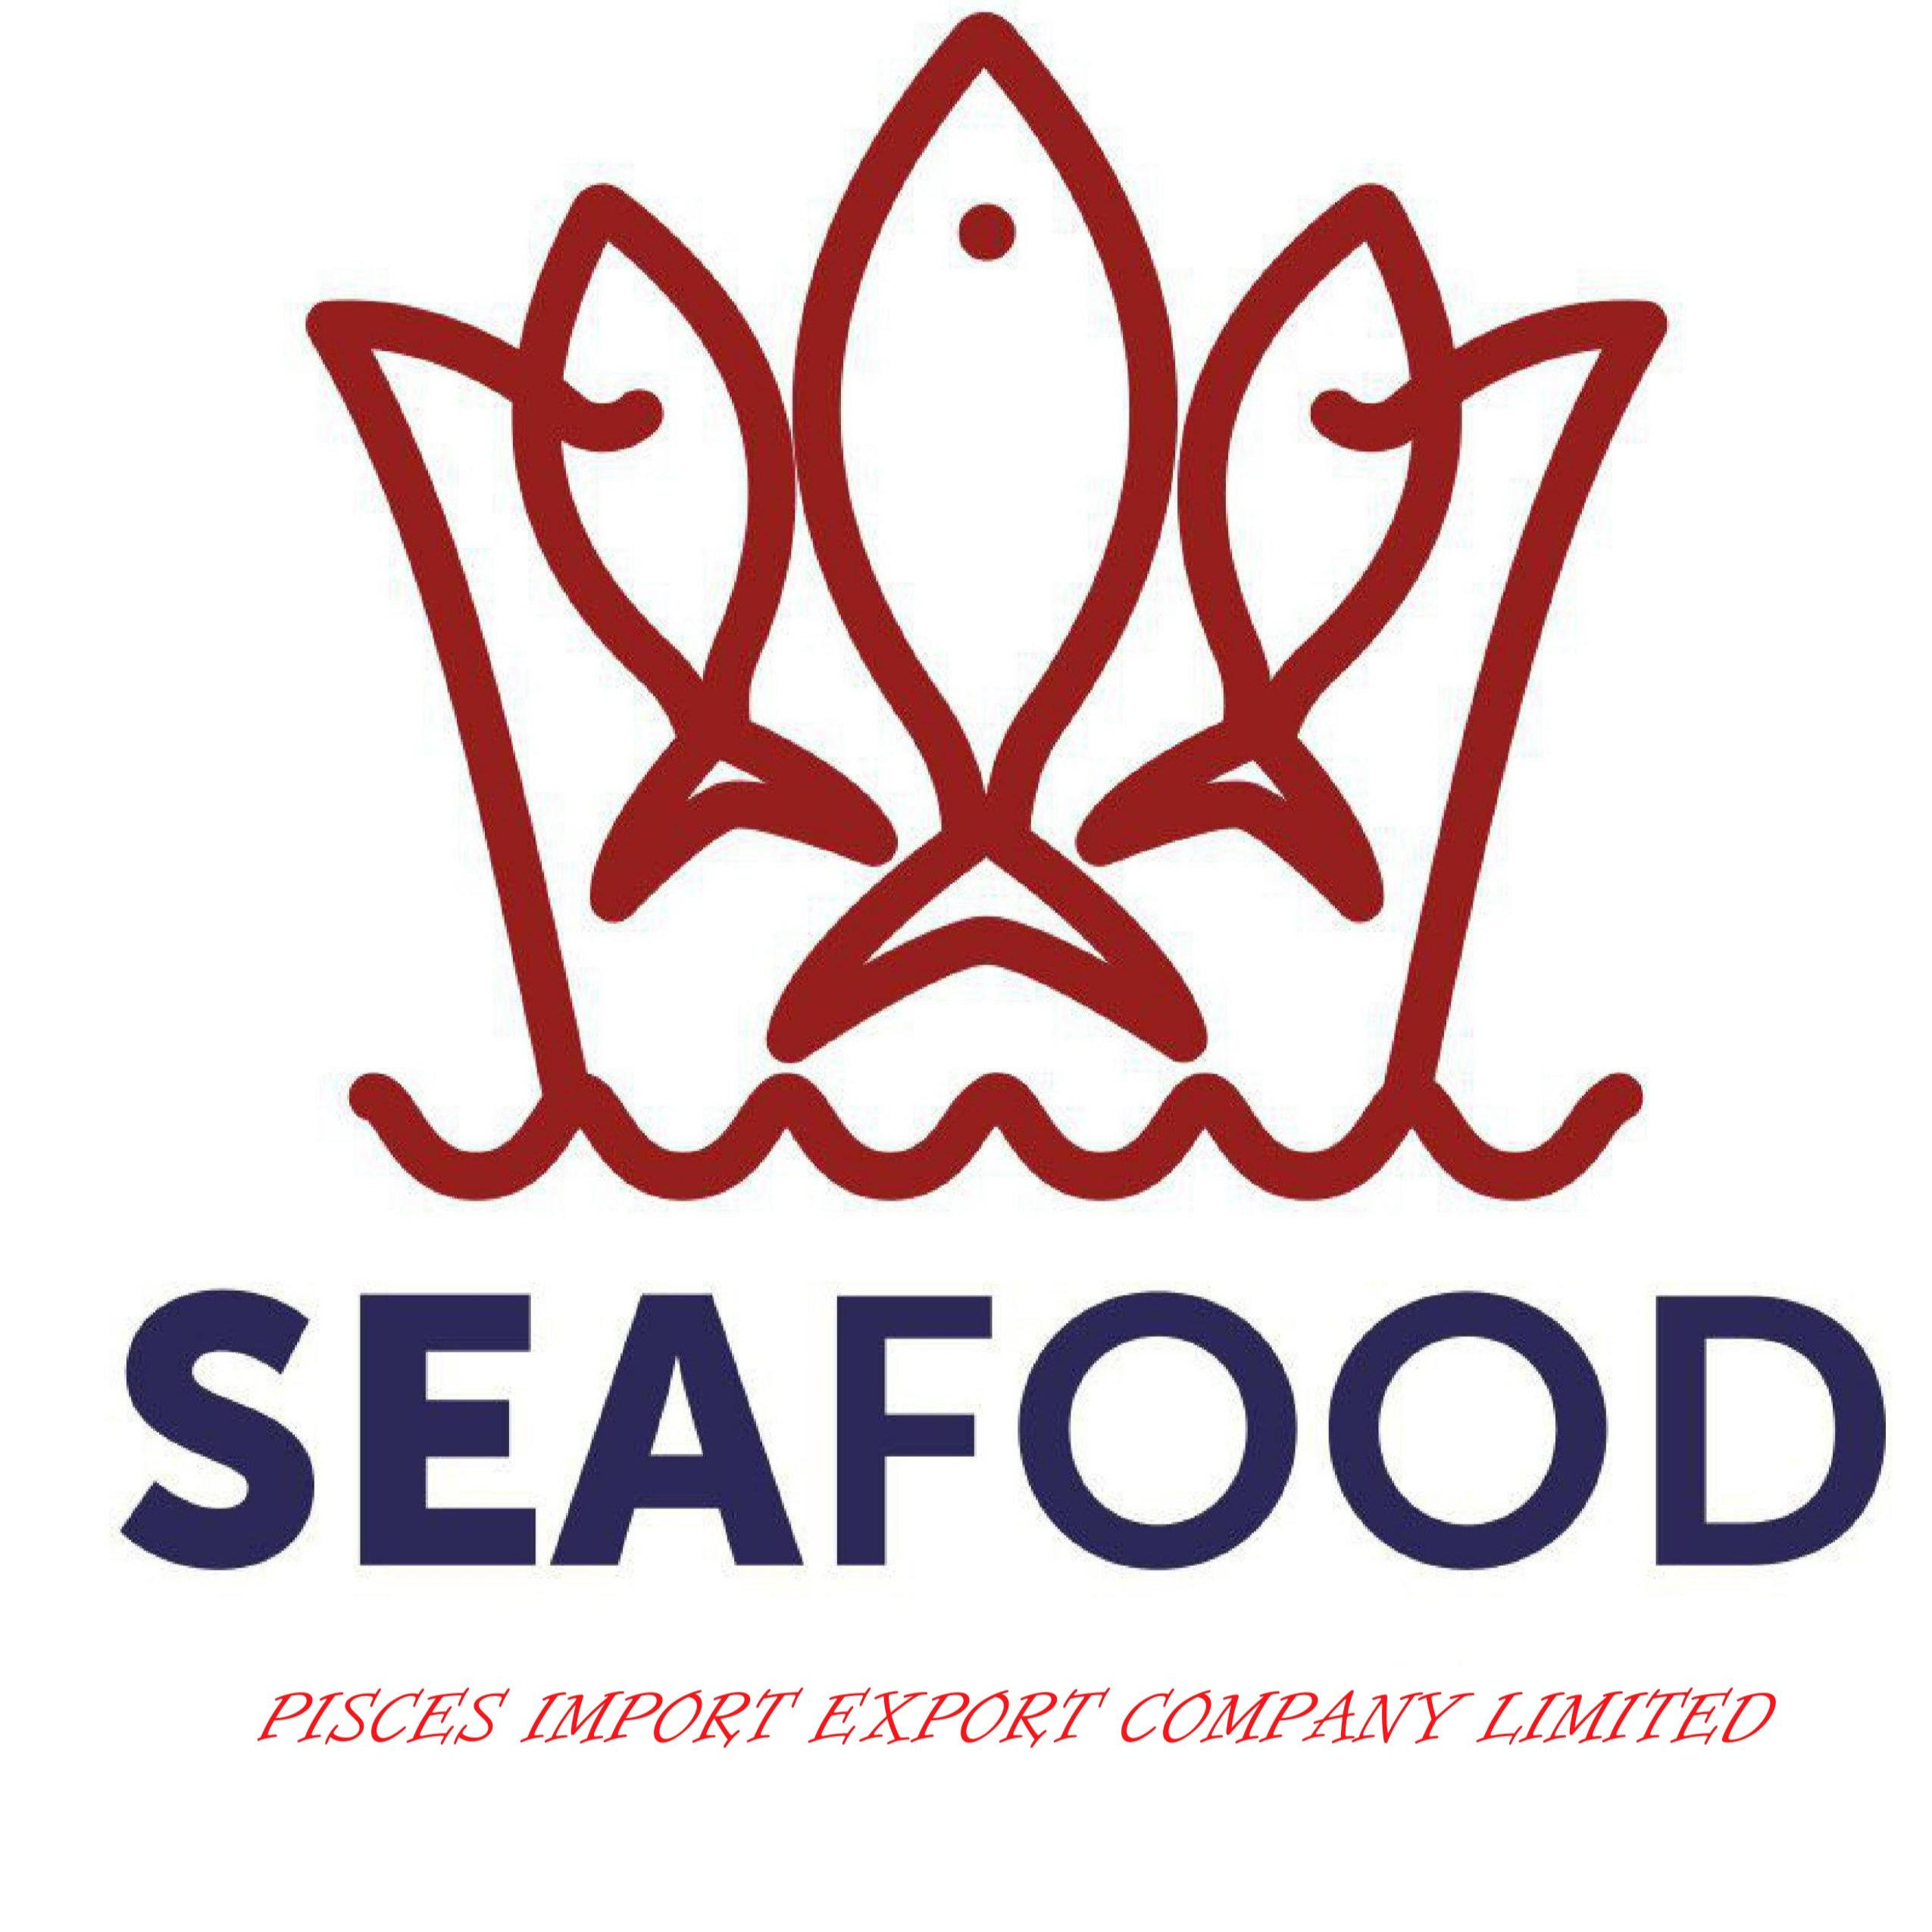 PISCES IMPORT EXPORT COMPANY LIMITED